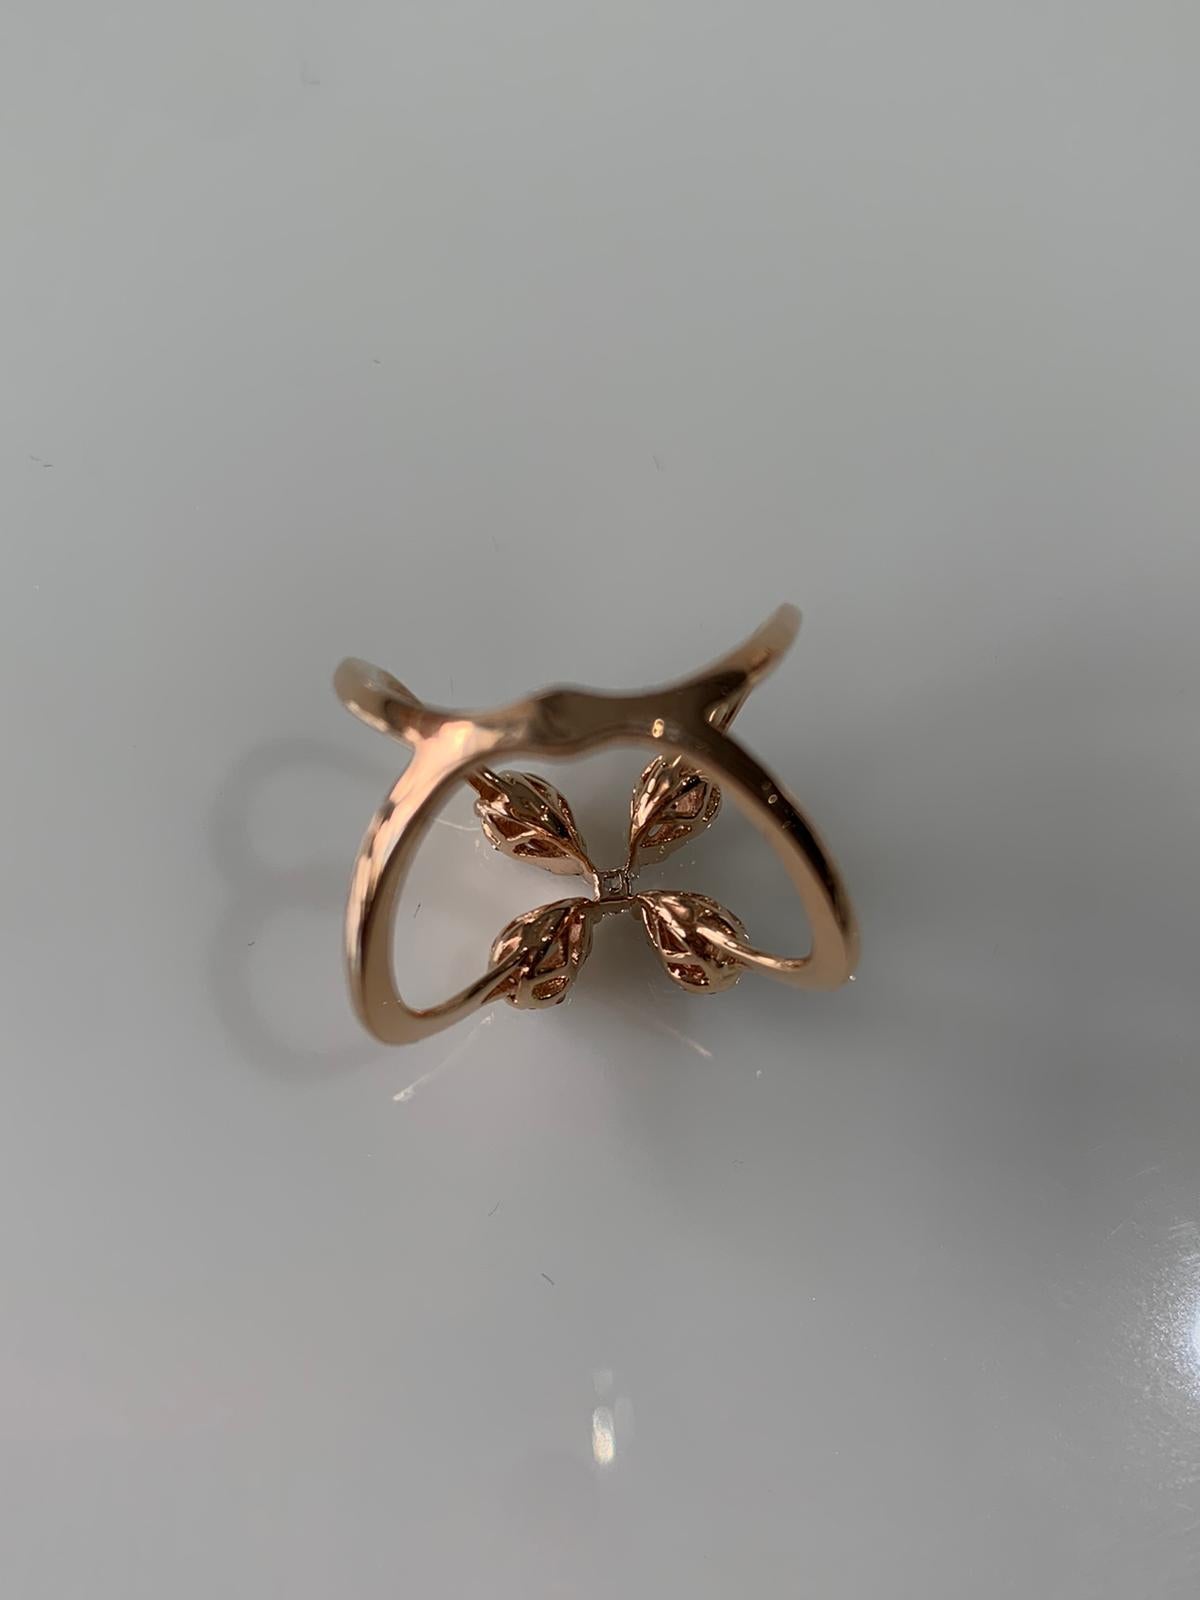 A beautiful and chic diamond pressure ring set in 18k rose gold . The diamond weight is .48 carats and net gold weight is 4.504 grams. The ring dimensions in cm 1.5 x 2.2 x 2.1 (LXWXH). US size 6 1/2.